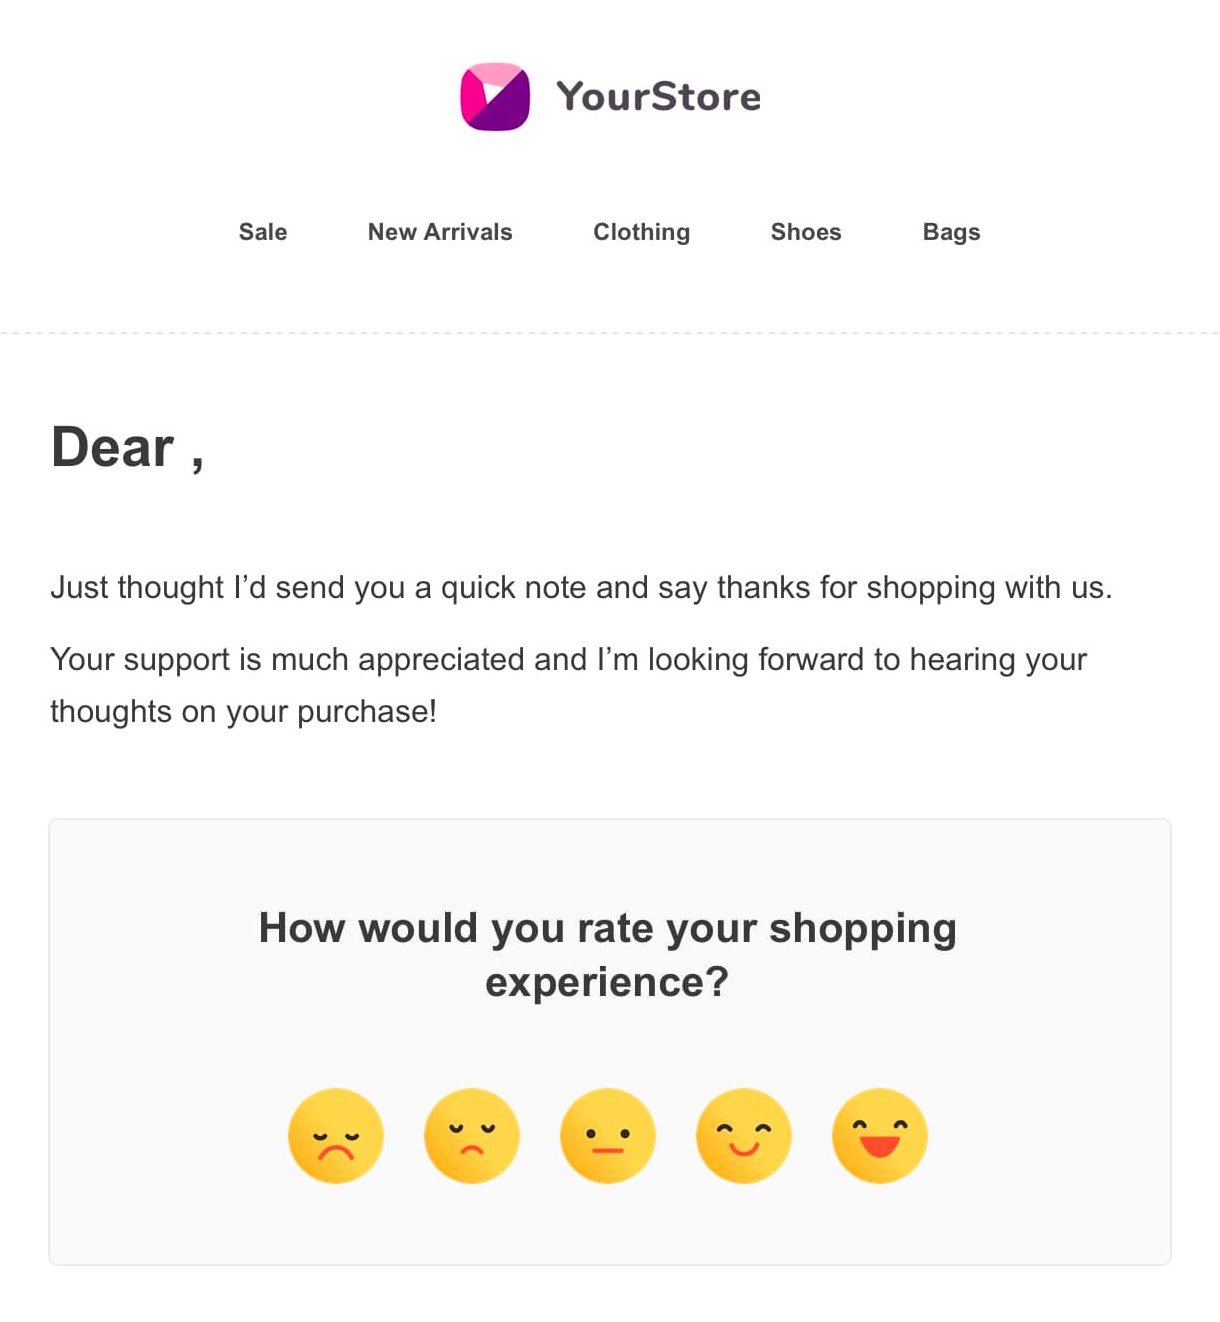 review rate your shopping experience with smiley faces newsletter email sequence template - mailerlite